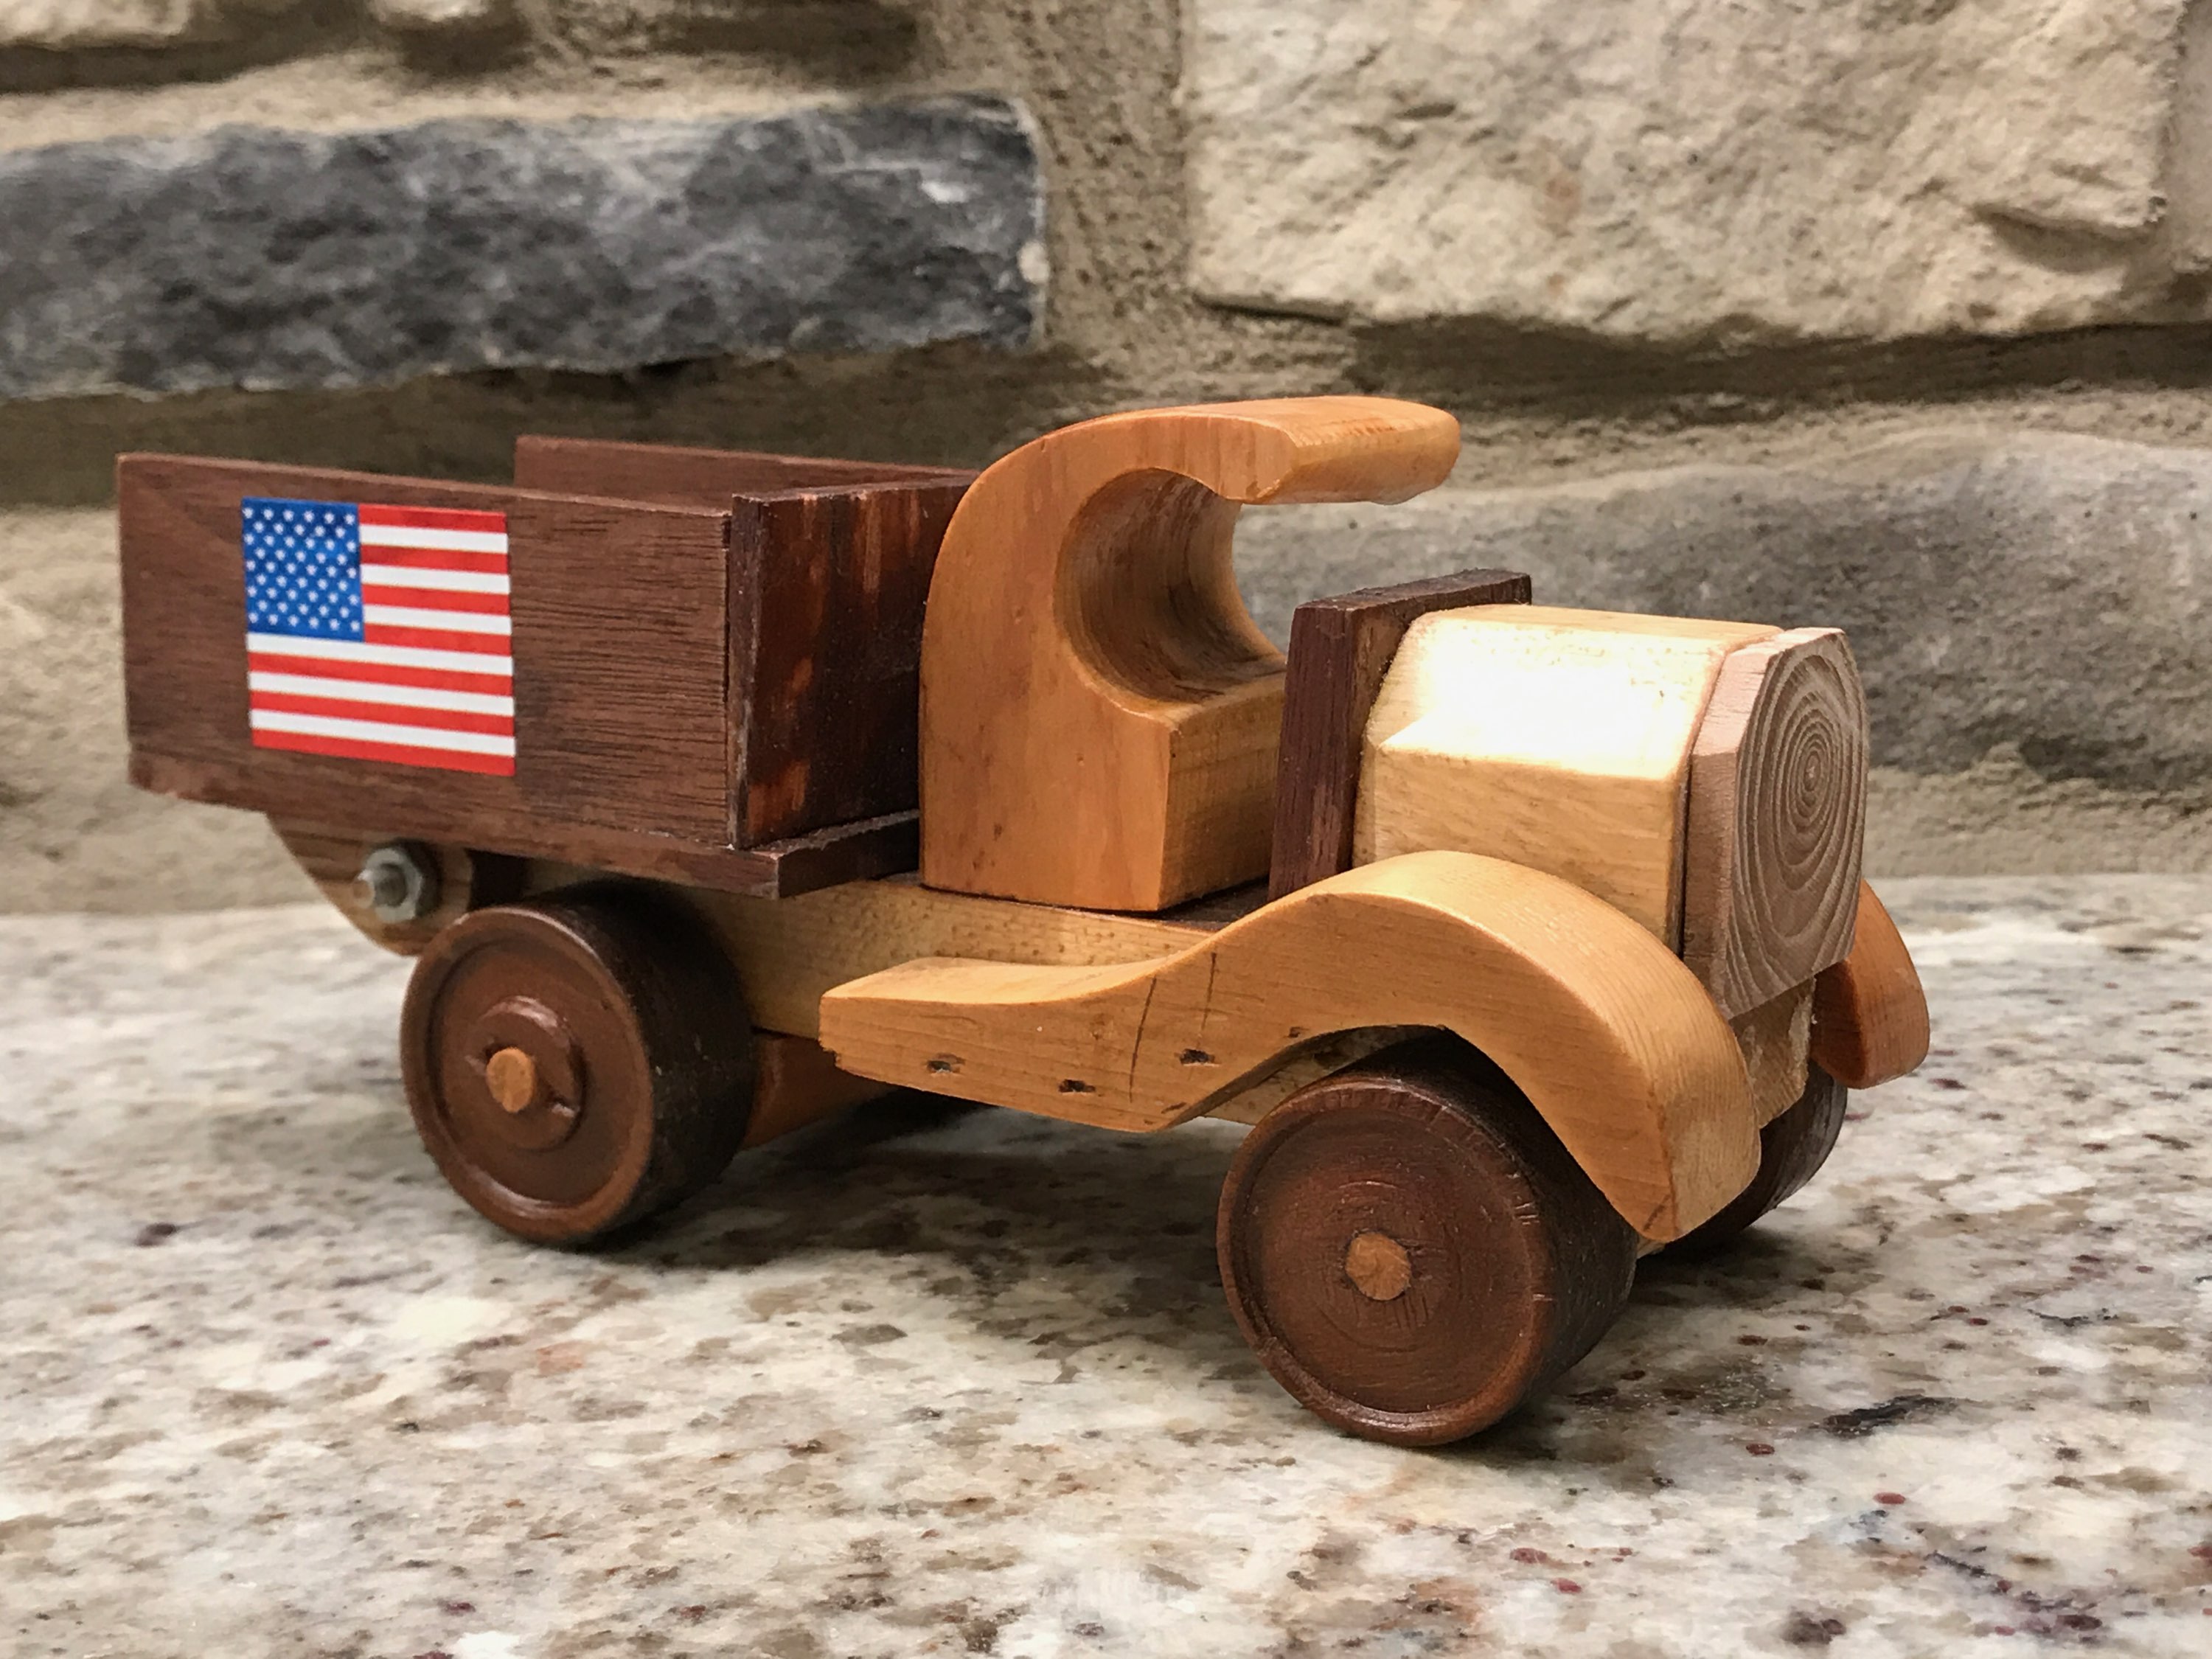 A handmade wooden toy truck with the American flag